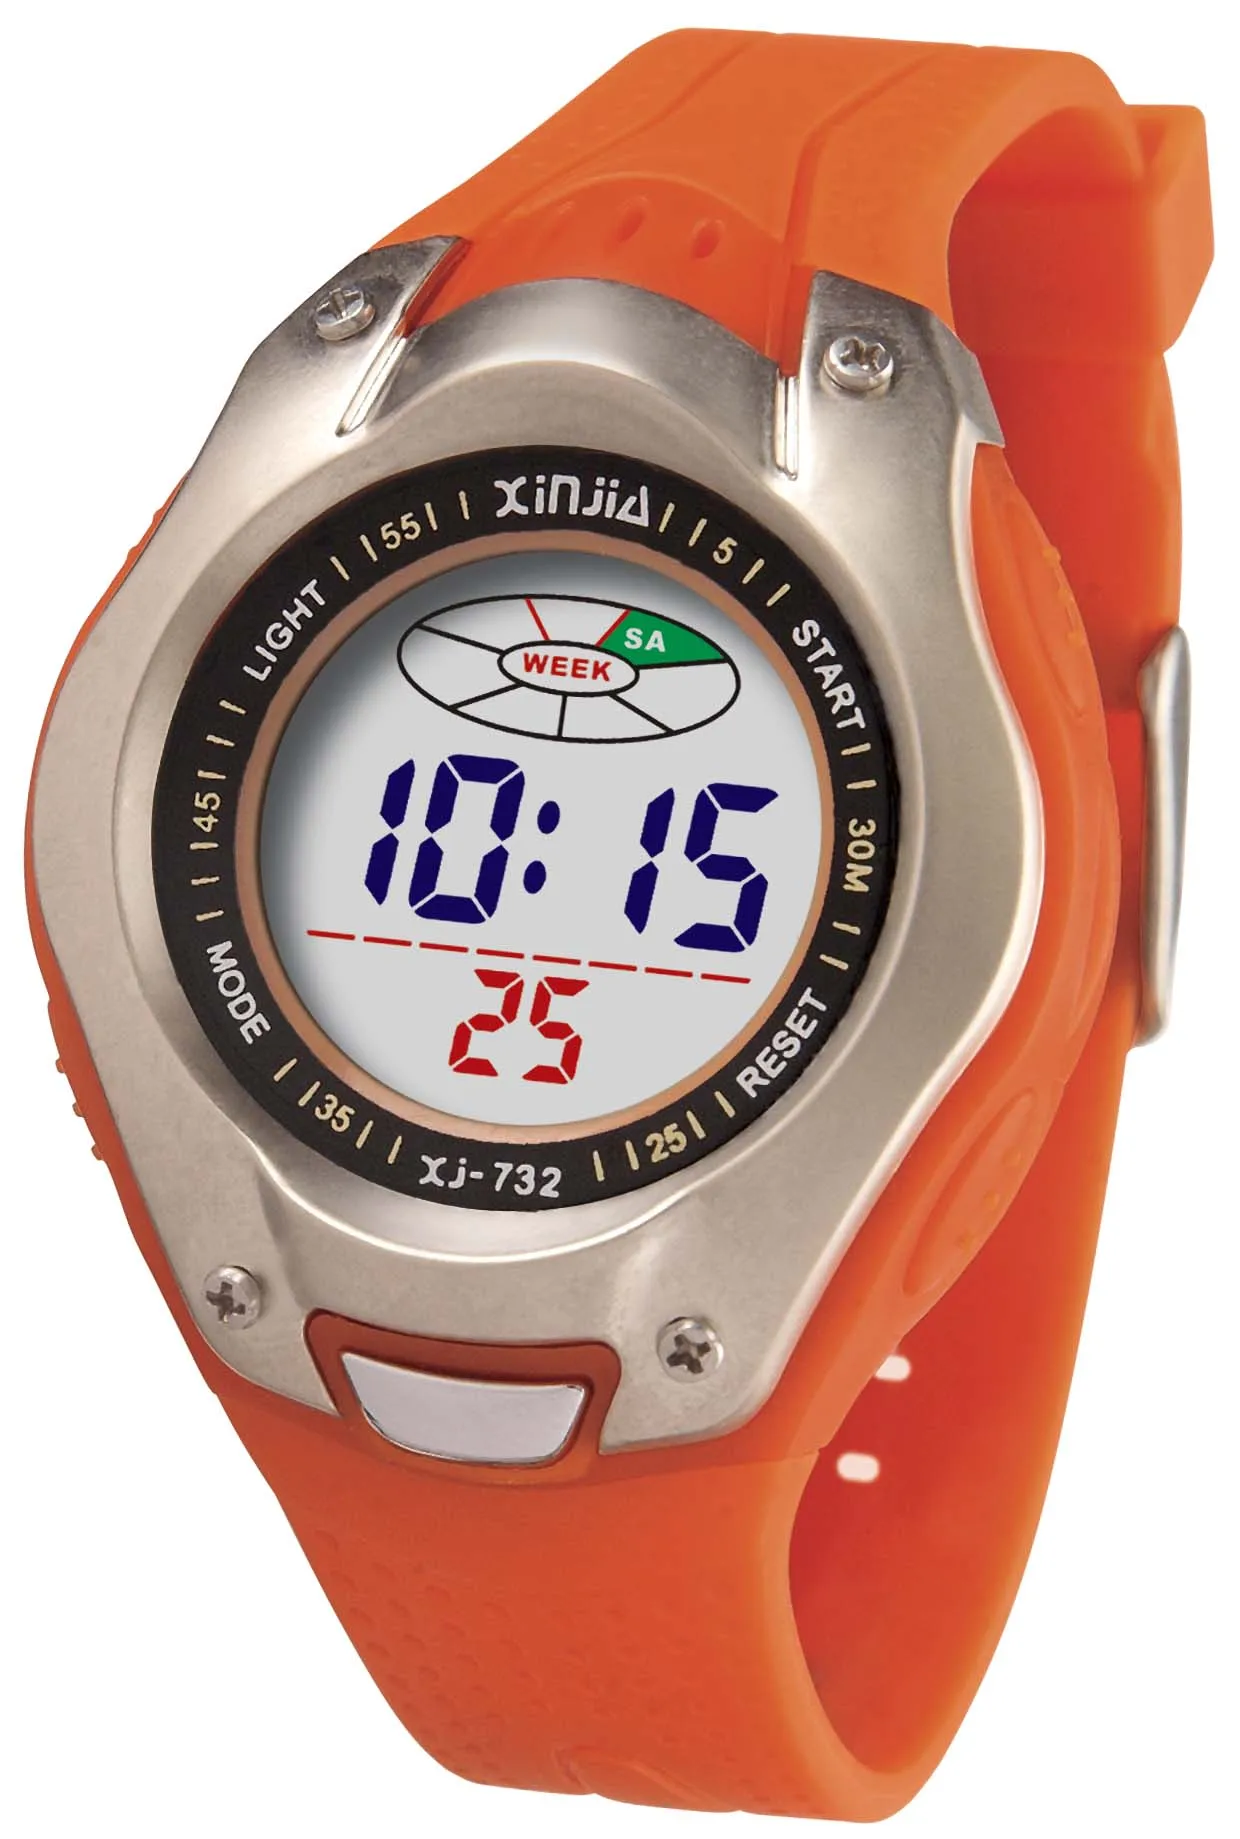 Buy China Wholesale Fashionable Digital Sports Watch, Lcd Screen, With Big  Digits, Water-resistant & Fashionable Digital Sports Watch $1.68 |  Globalsources.com